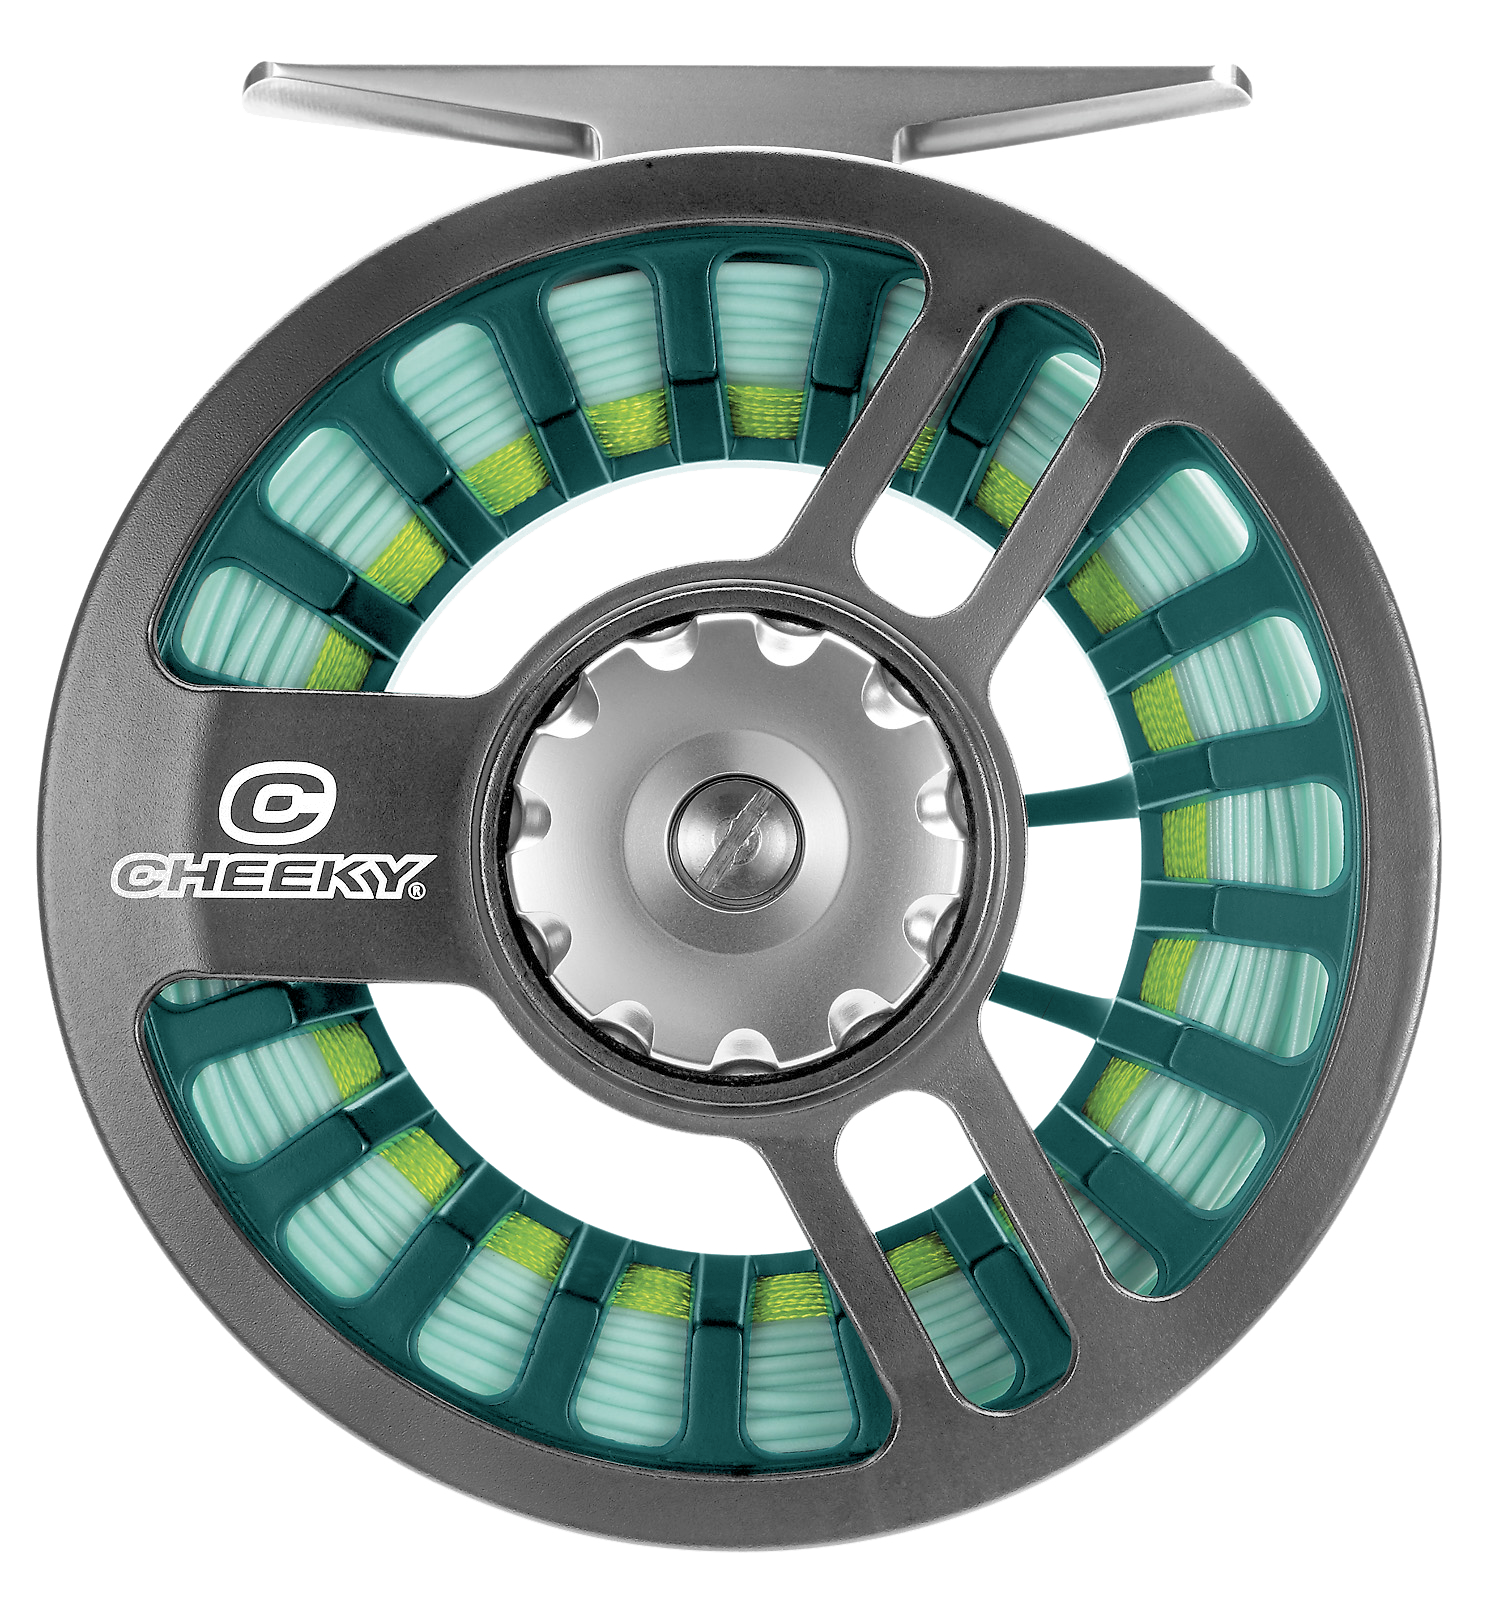 Buy Limited Edition Cheeky PreLoad 350 Reels Online - Cheeky Fishing